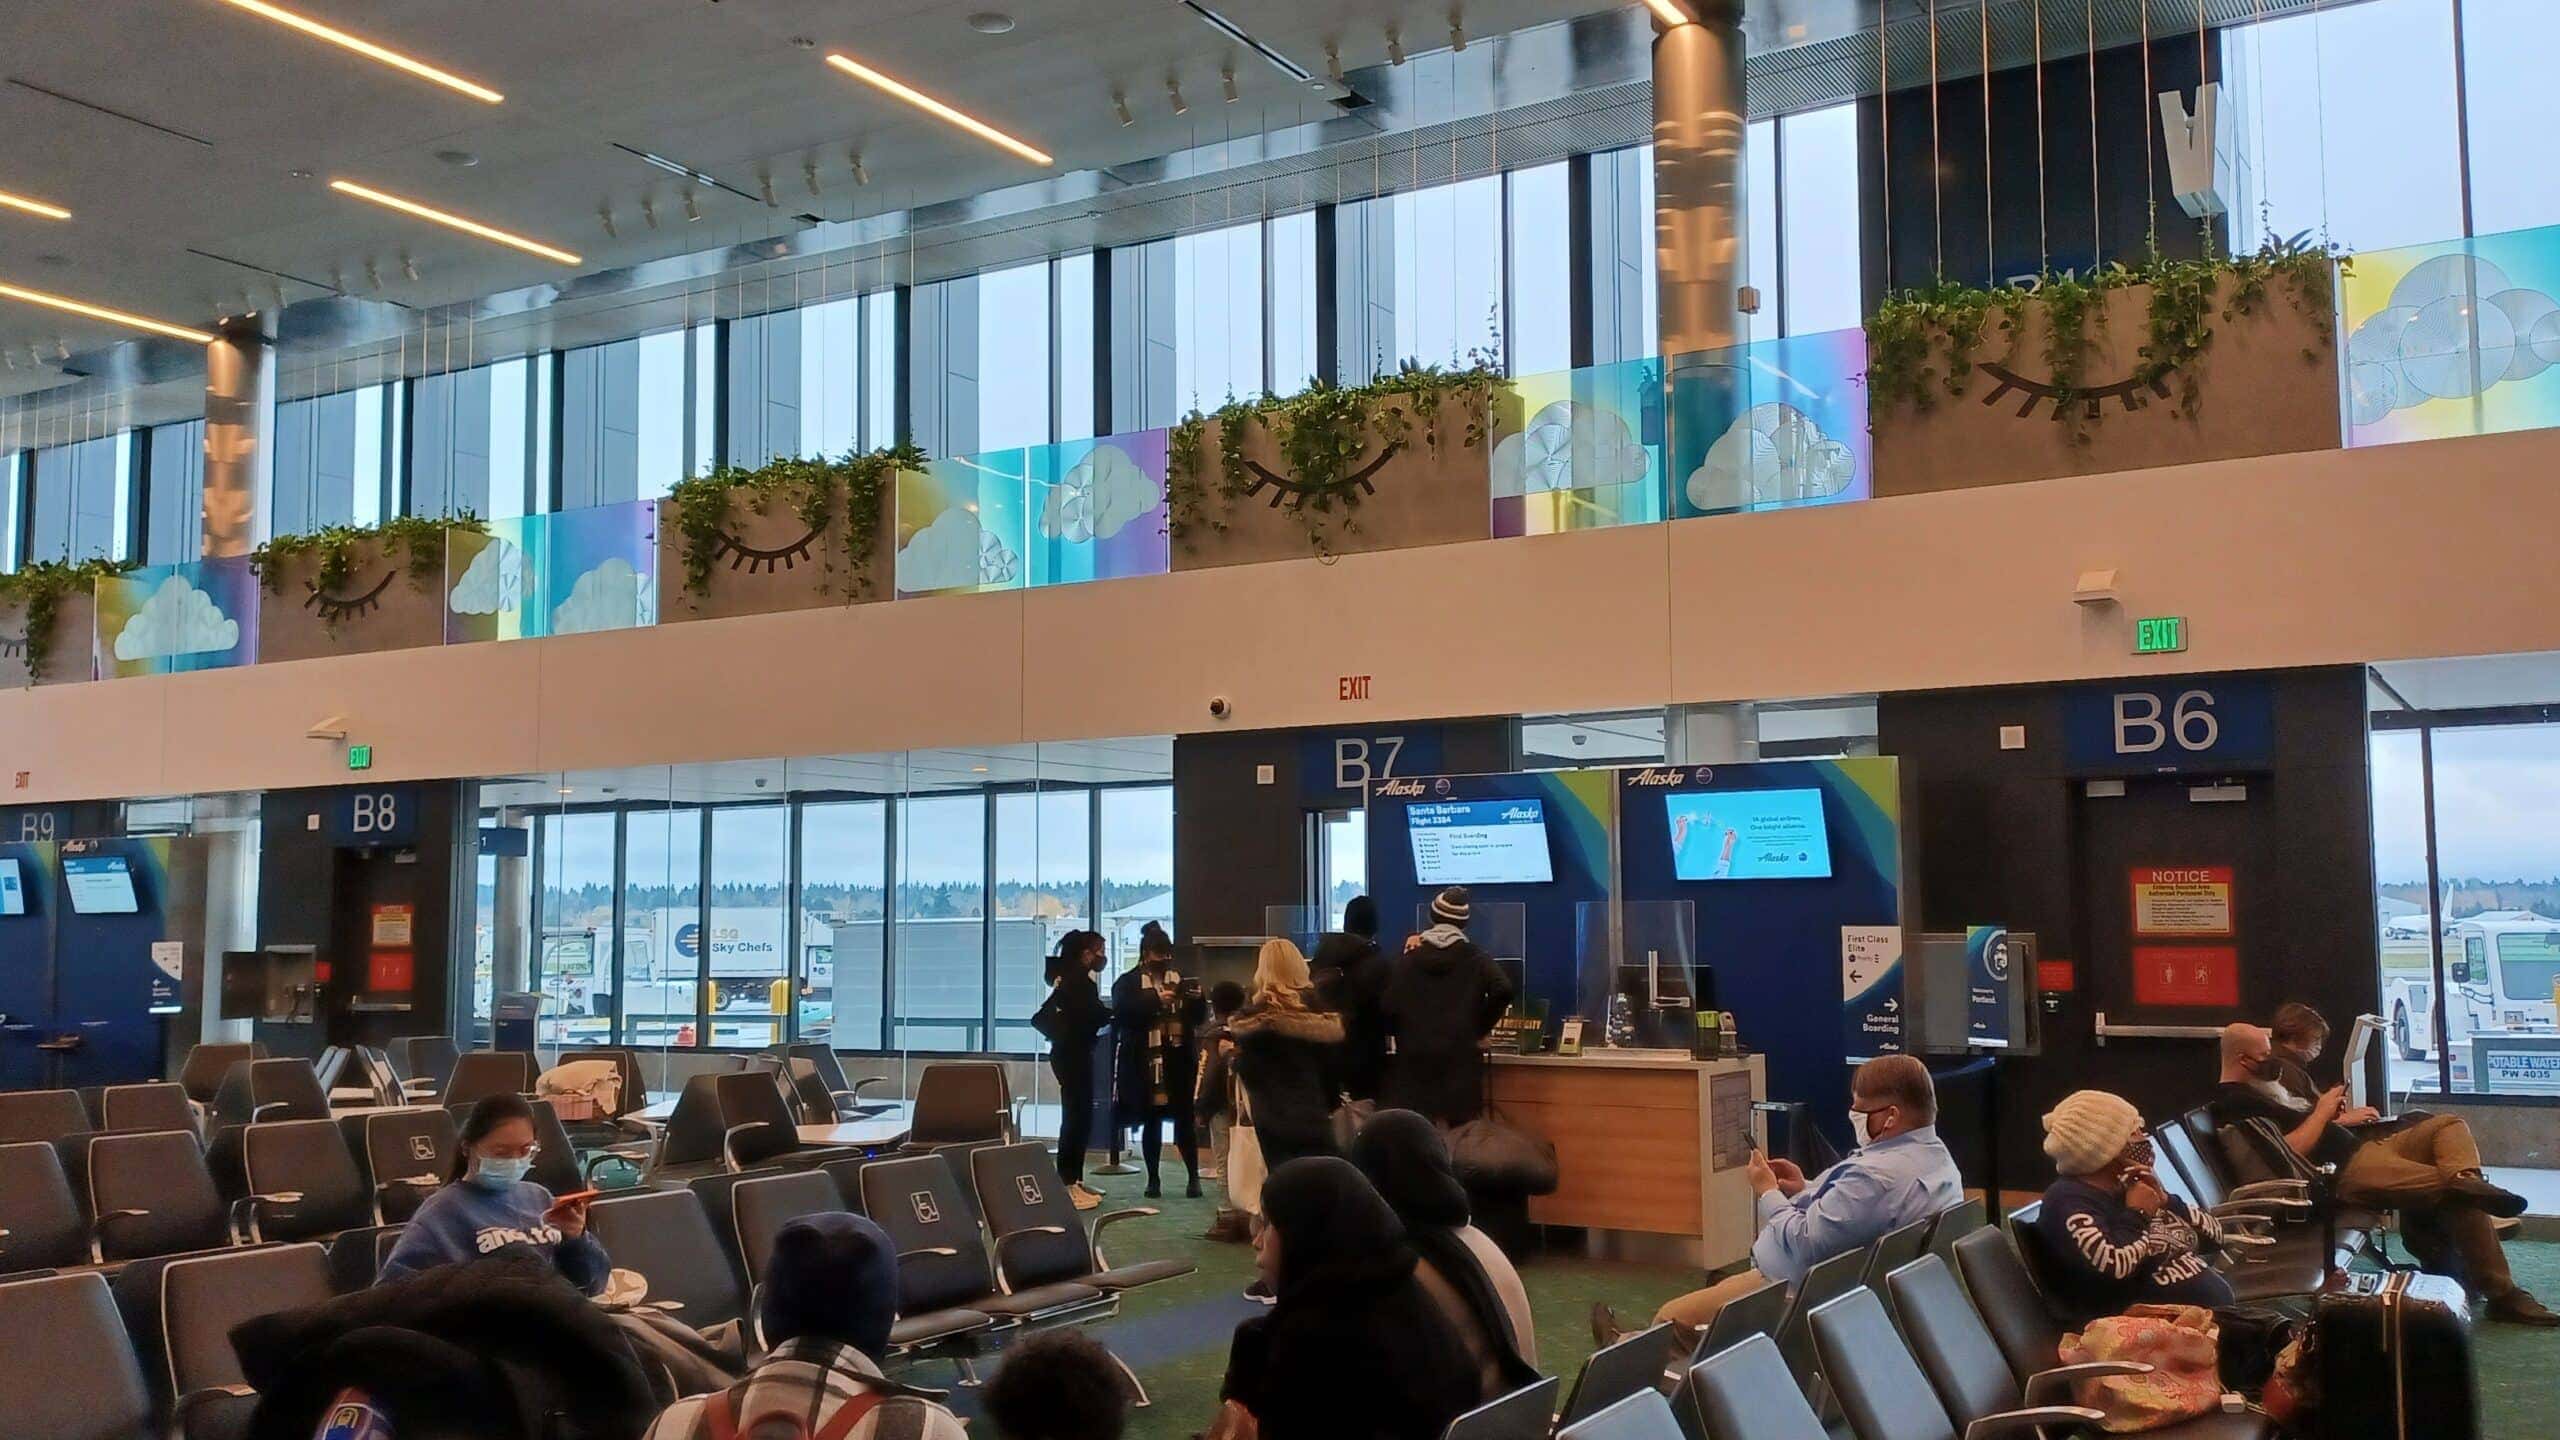 People sit on chairs at the airport, with rows of large windows